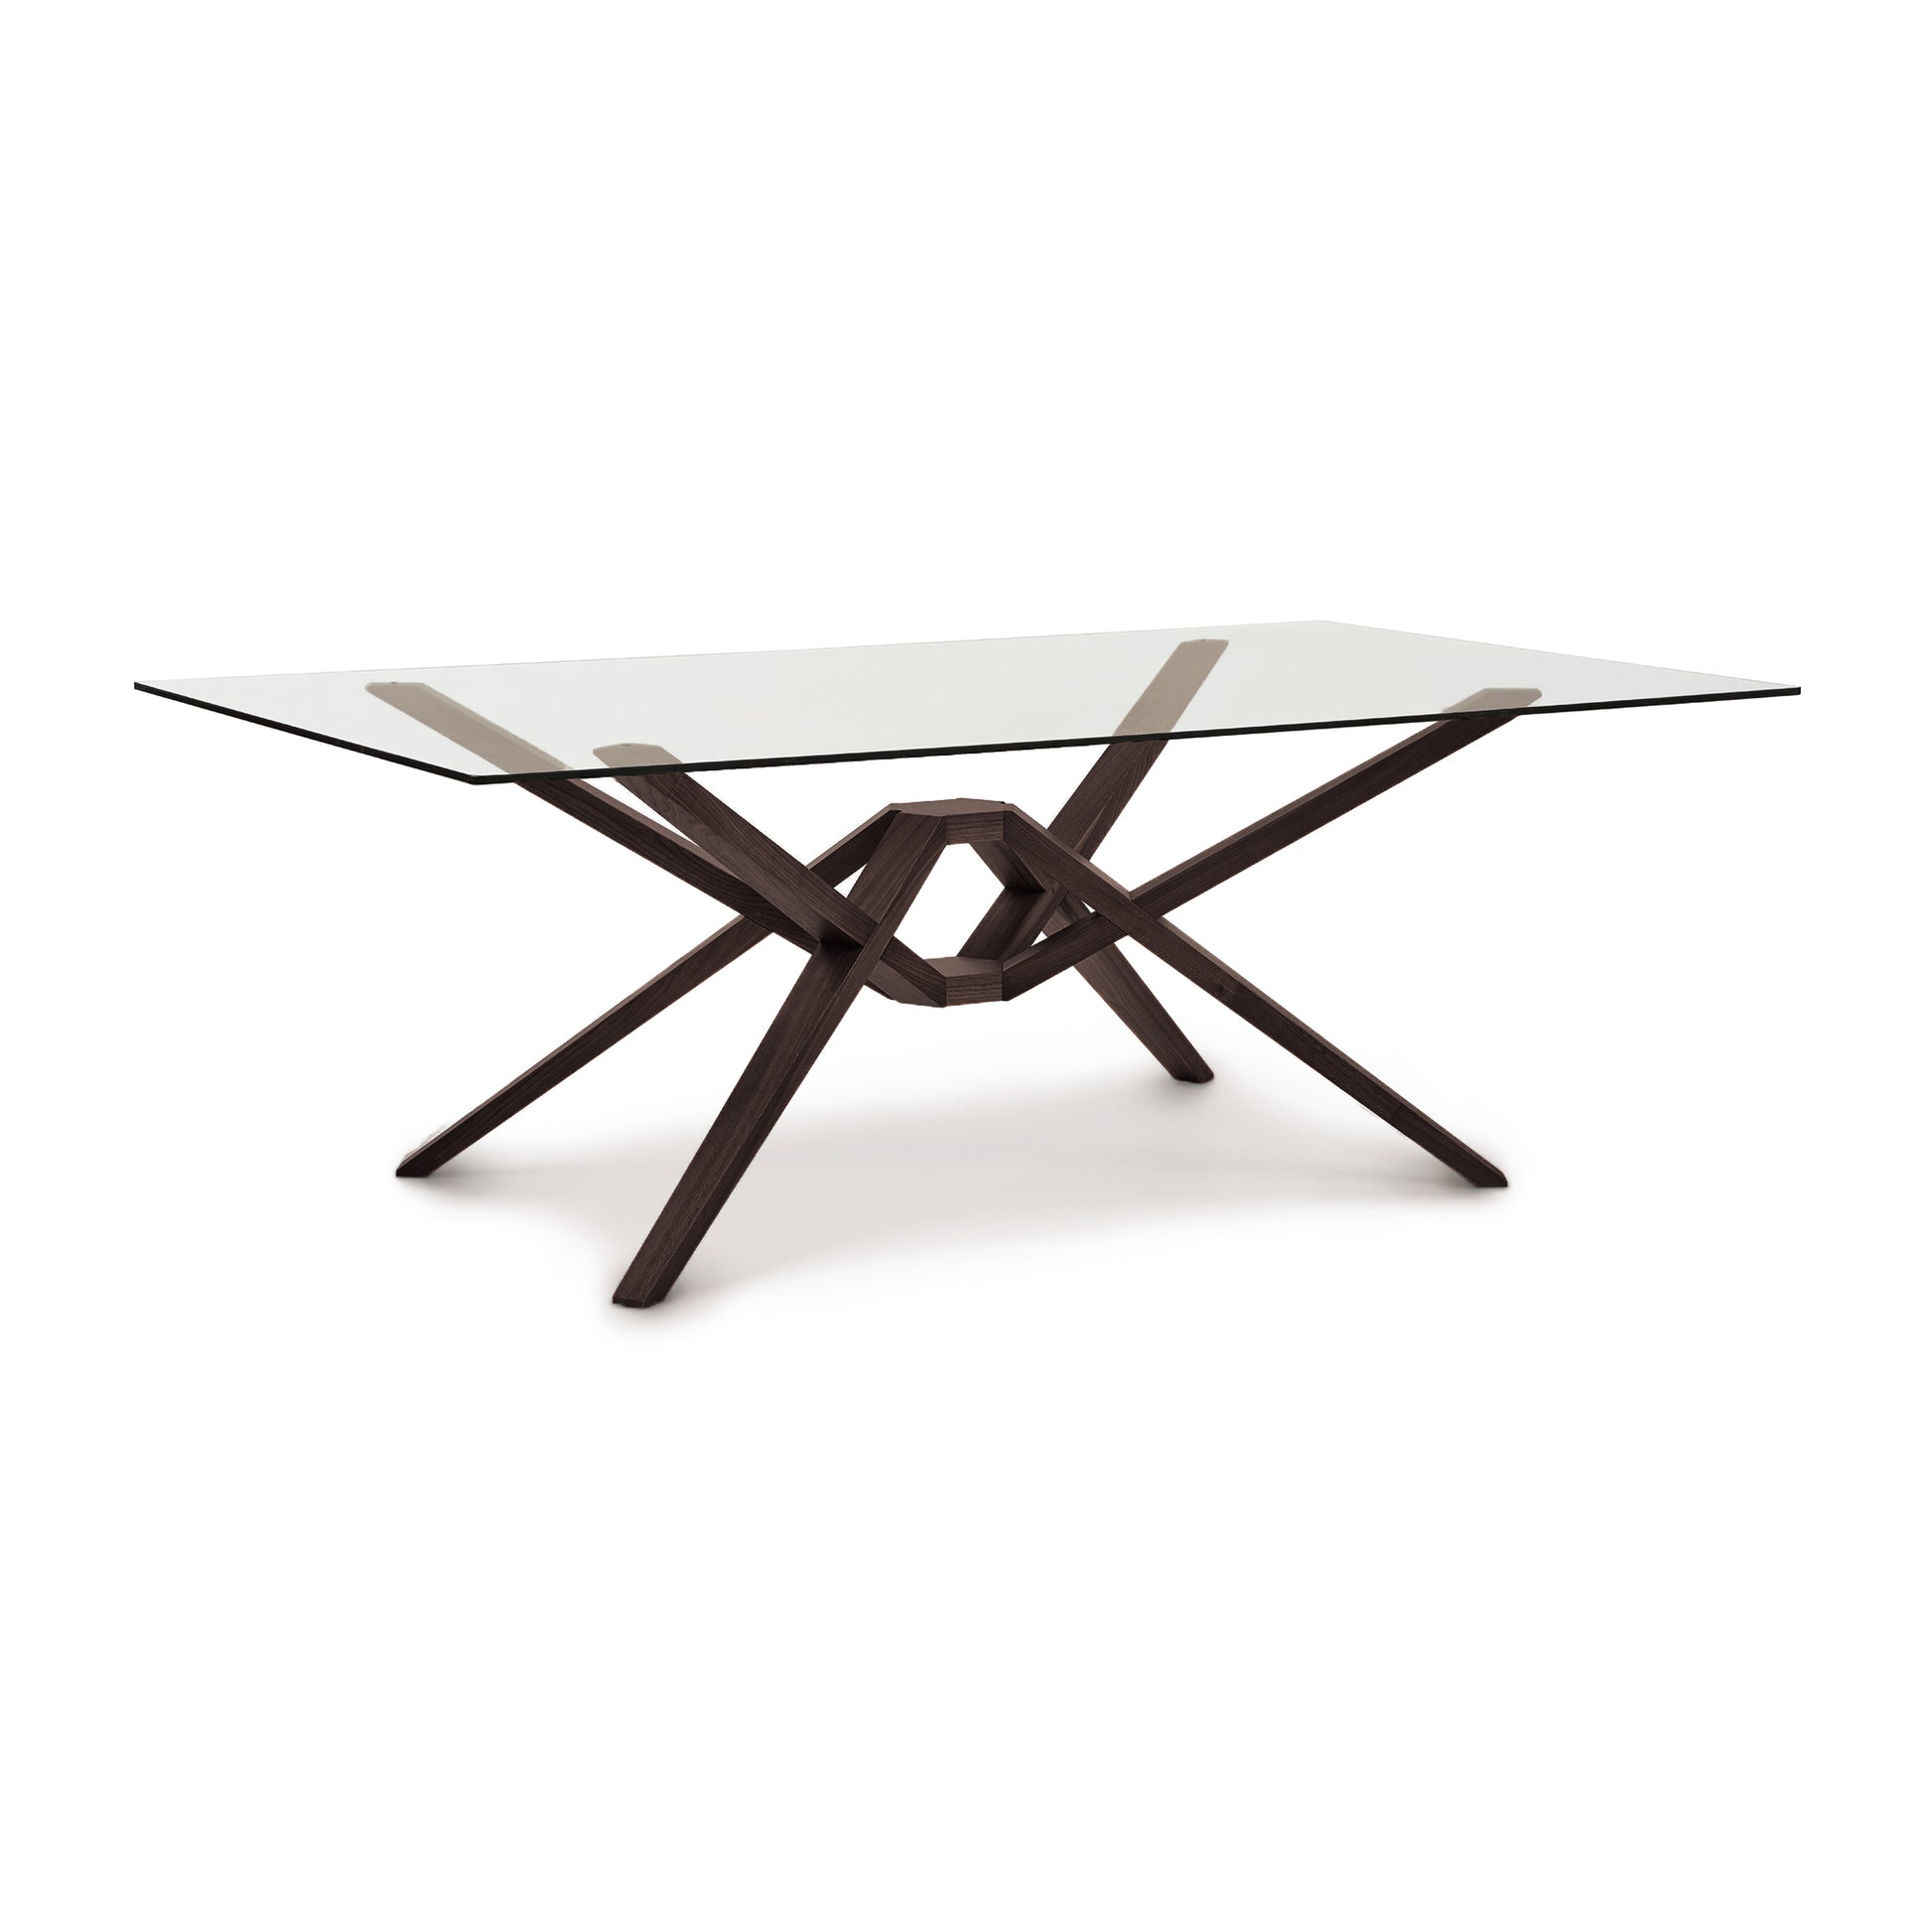 A modern Copeland Furniture Exeter Rectangular Glass Top Table with a wooden base featuring an intricate cross and overlap design, isolated on a white background.